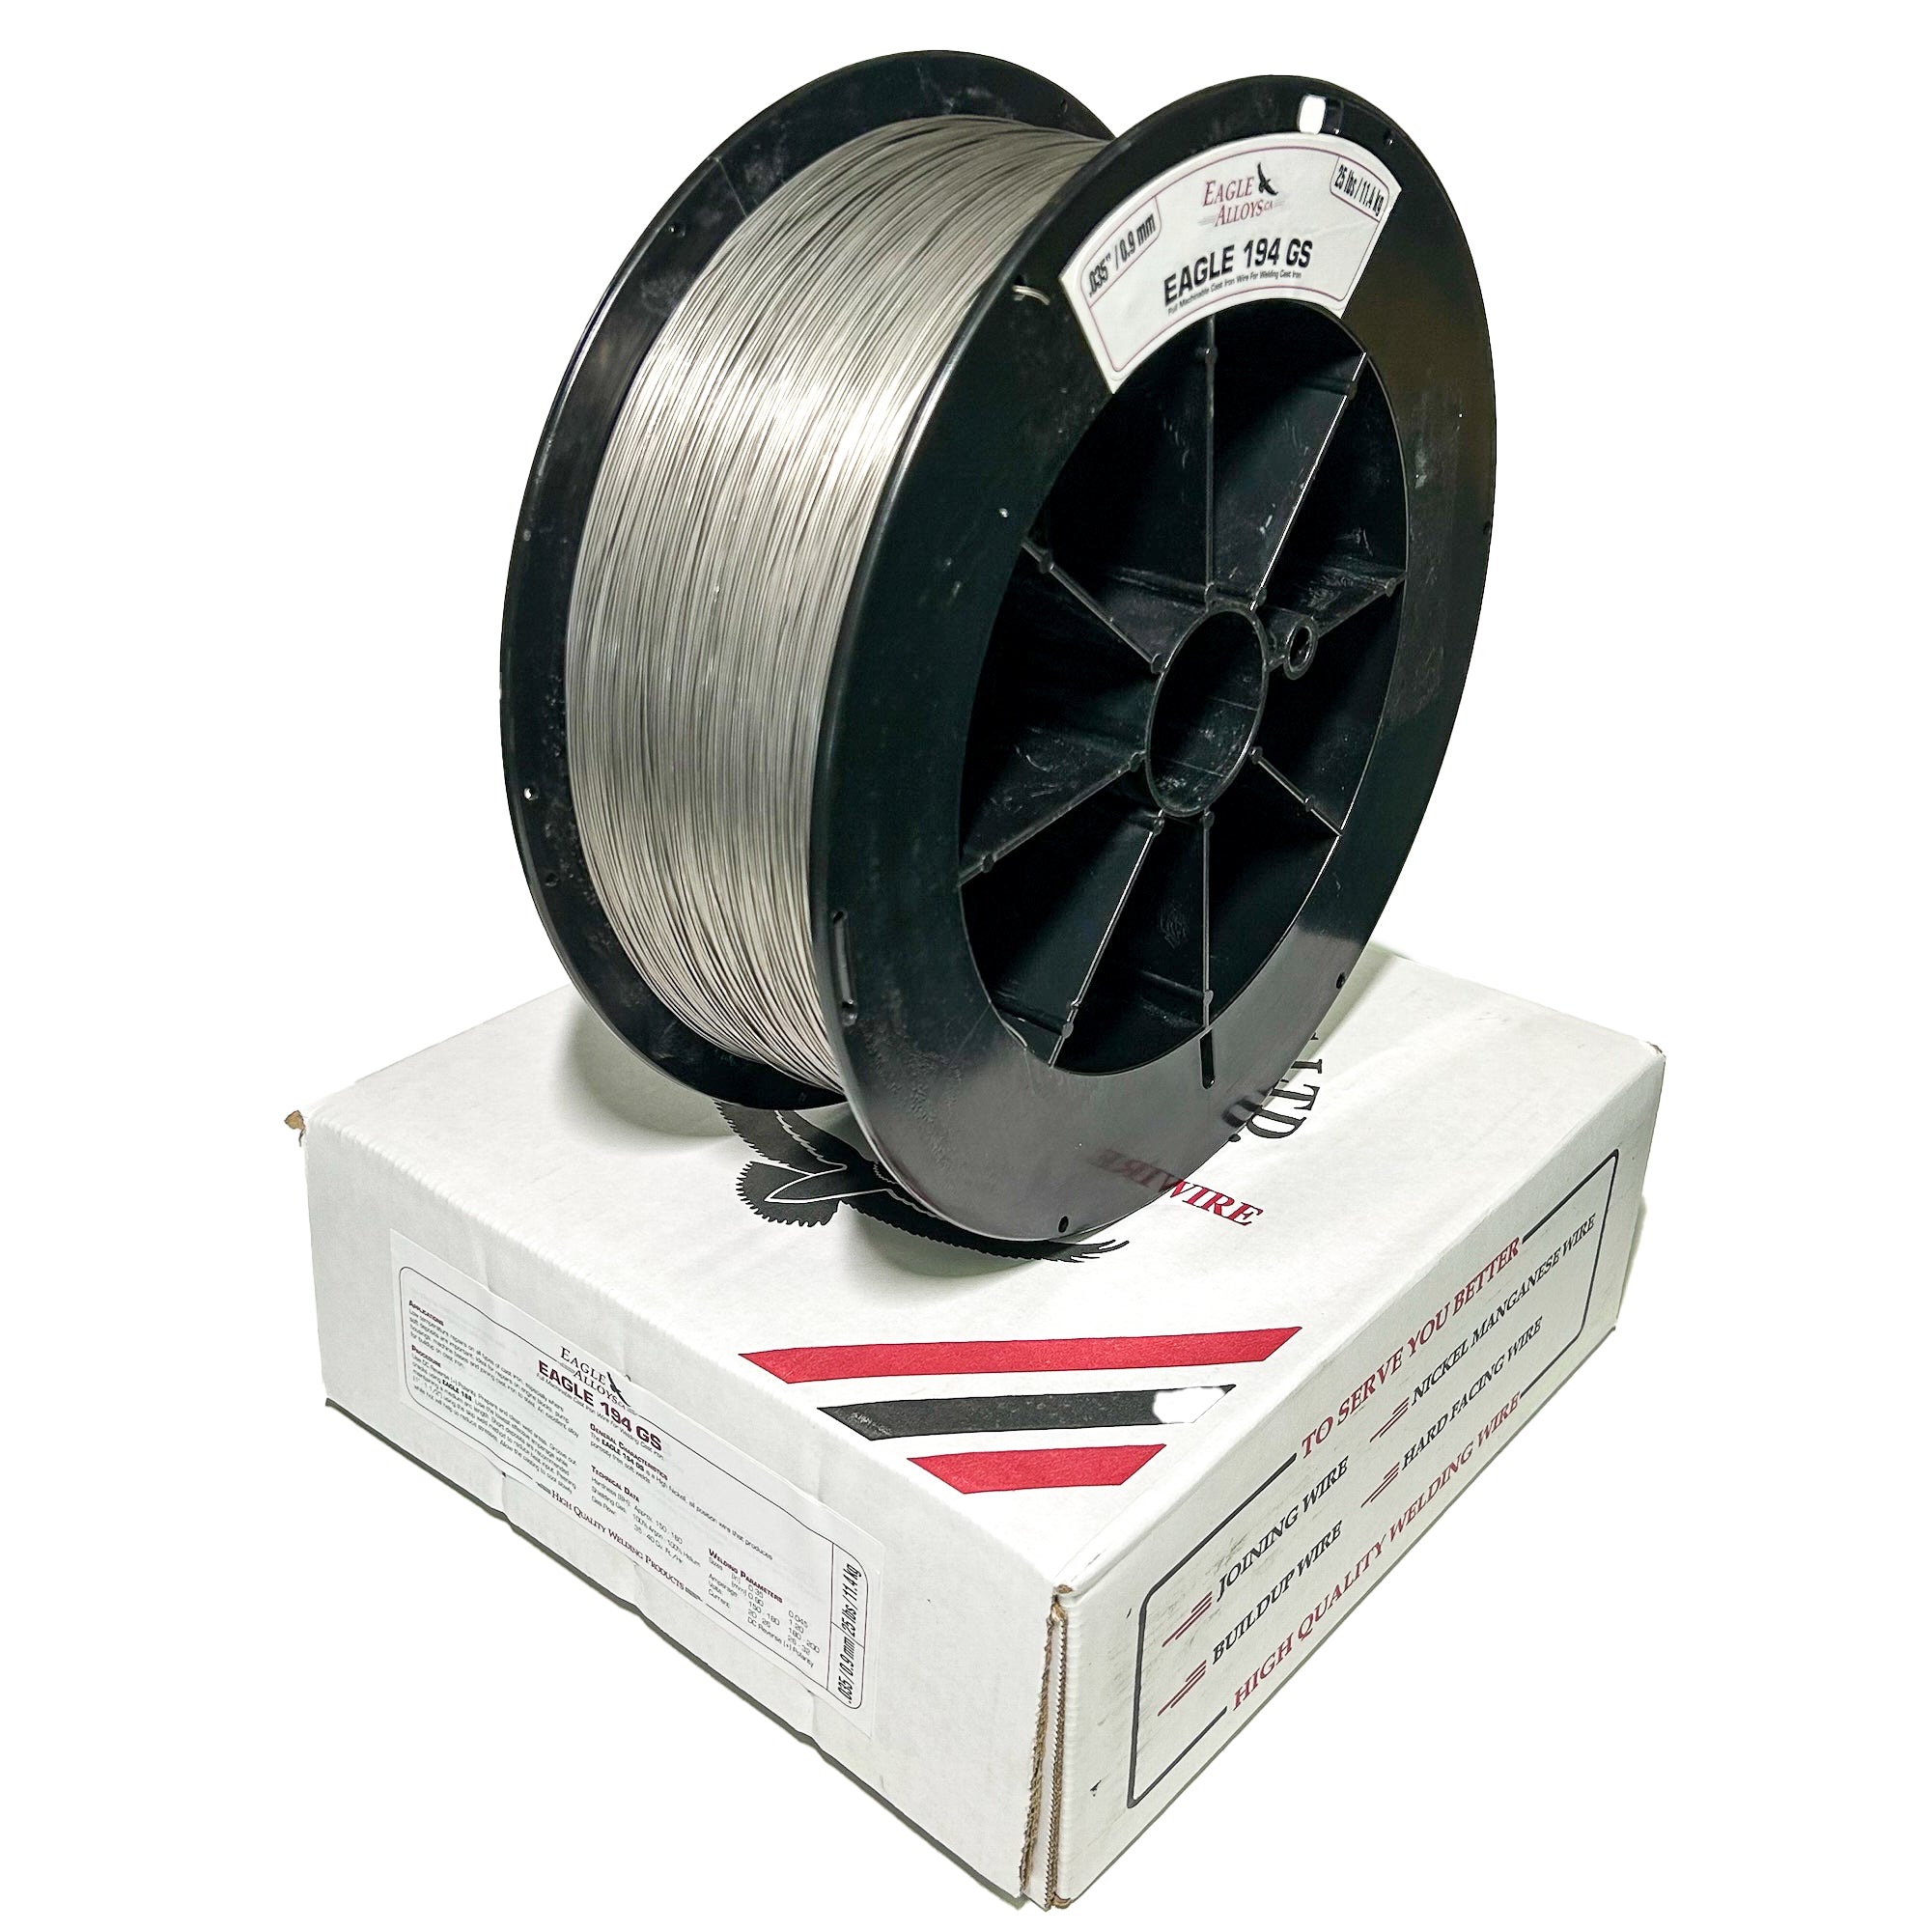 EAGLE 194 GS | Full Machinable Solid Cast Iron Wire For Welding Cast Iron